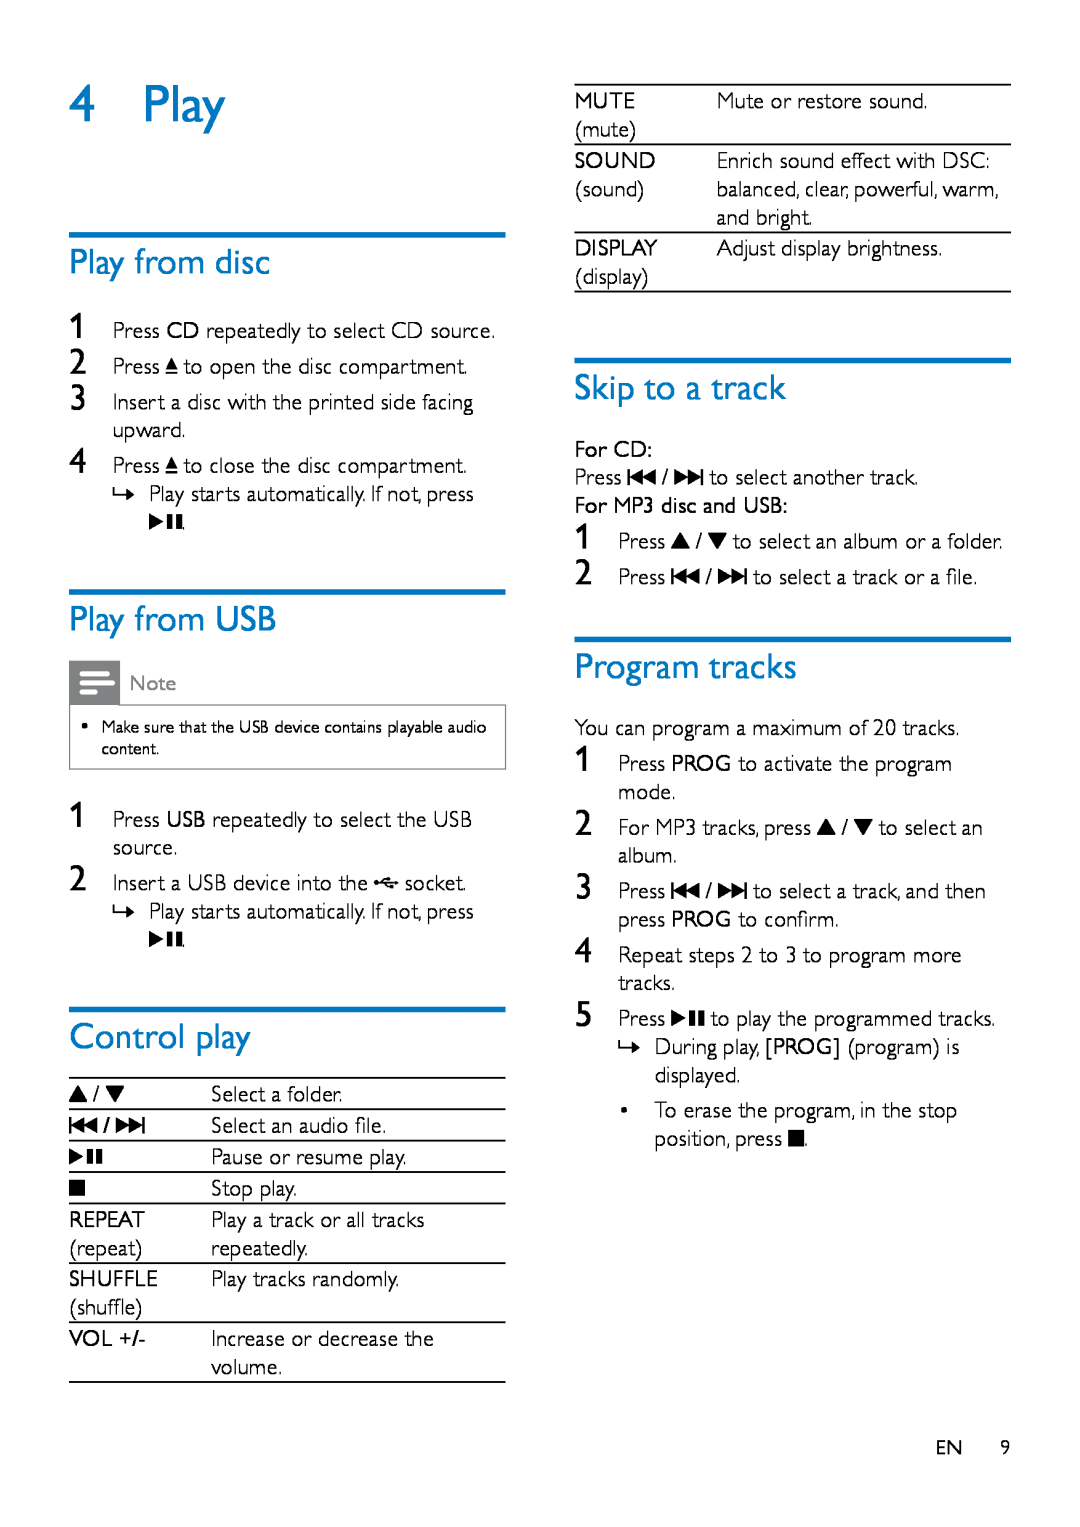 Philips MCM2150 user manual Play from disc, Play from USB, Control play, Skip to a track, Program tracks 